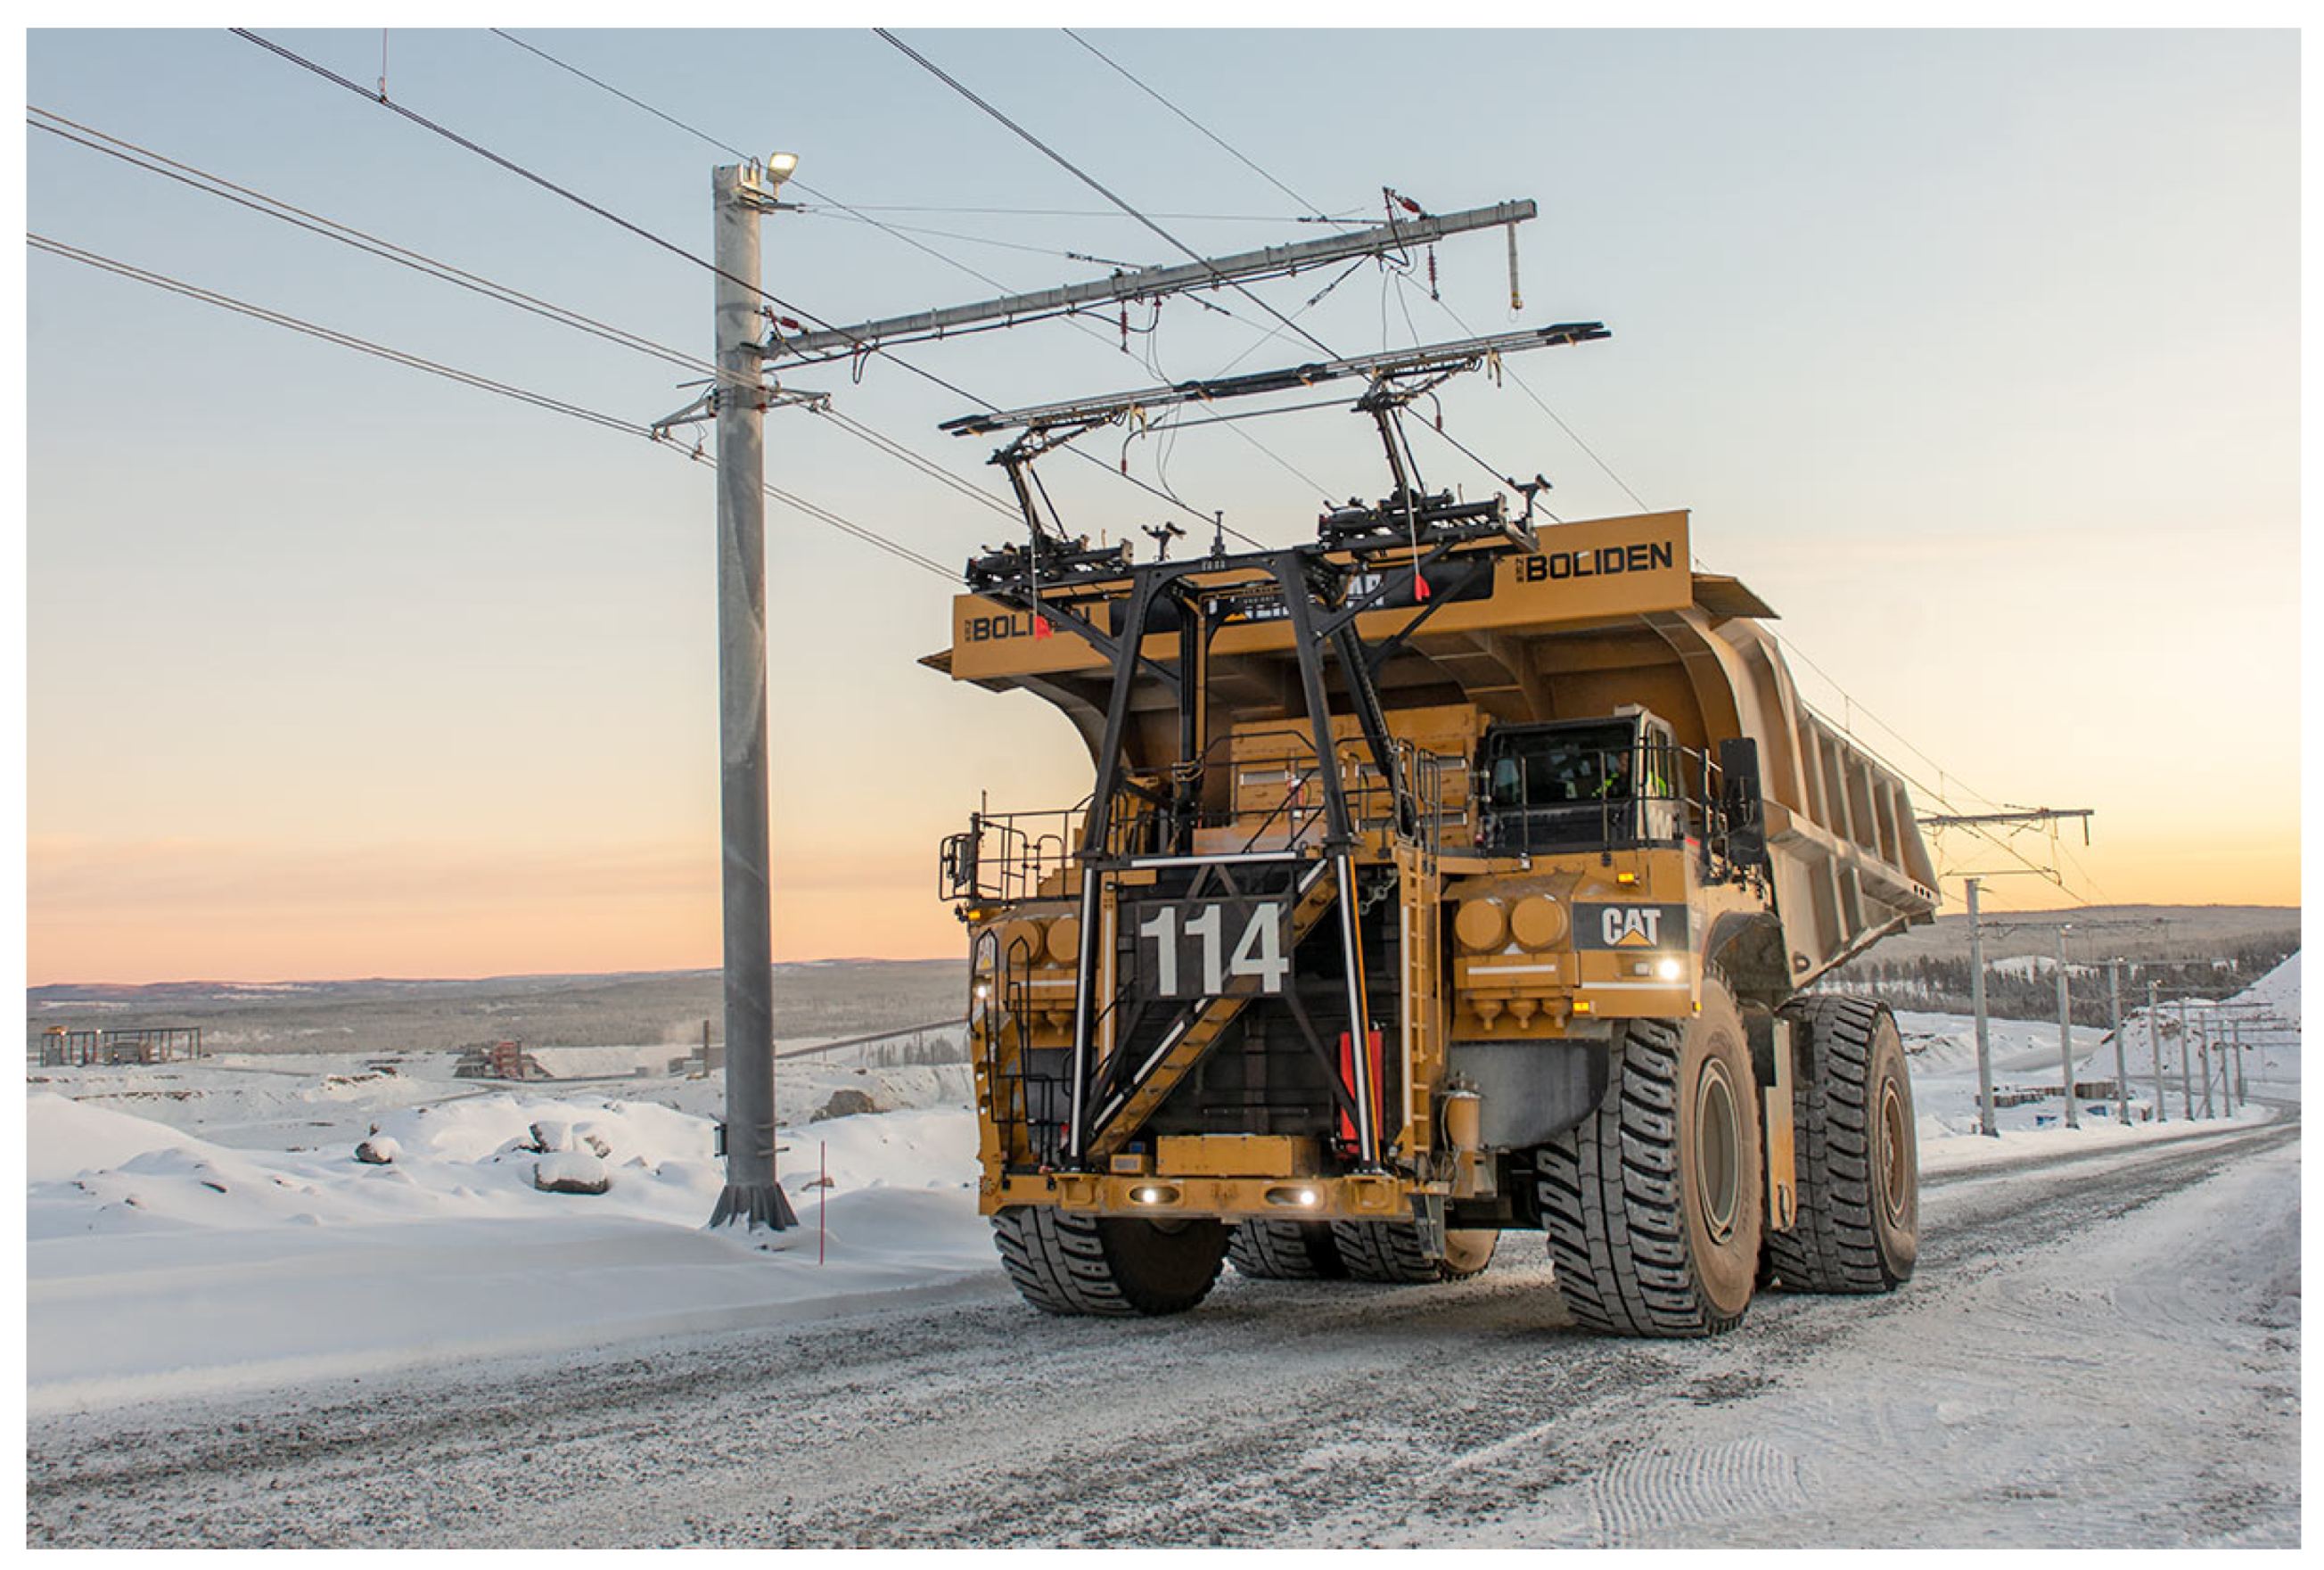 Energies | Free Full-Text | Drive-Cycle Simulations of Battery-Electric  Large Haul Trucks for Open-Pit Mining with Electric Roads